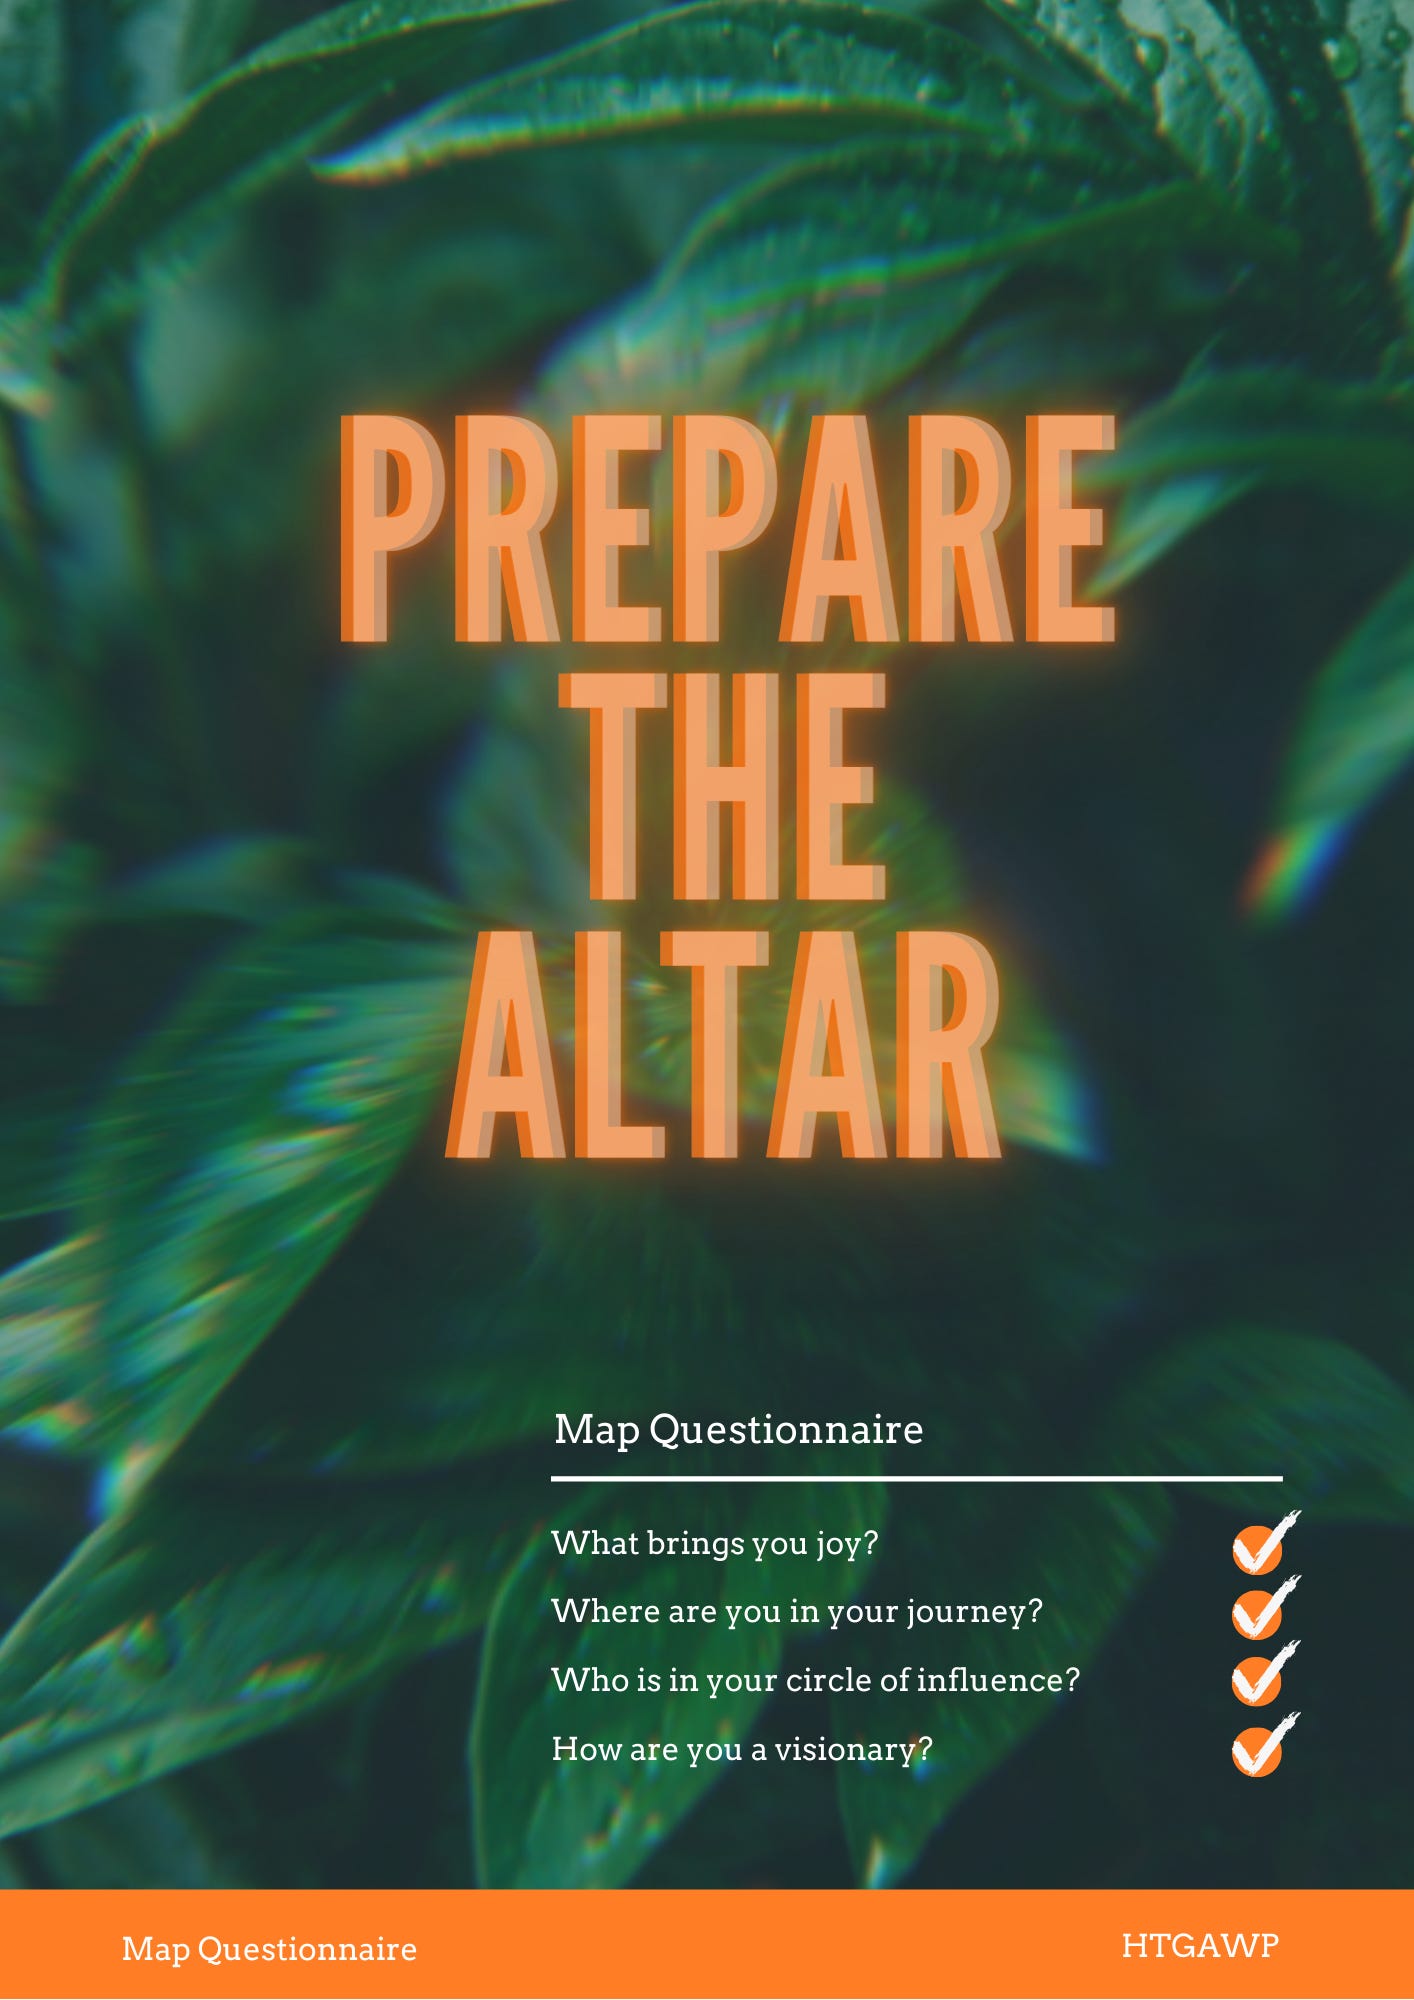 Picture of Prepare the Altar Map Questionnaire over green leaf display. Includes points covered in the questionnaire including What brings joy? Where are you in your journey? Who is in your circle of influence? How are you a visionary?